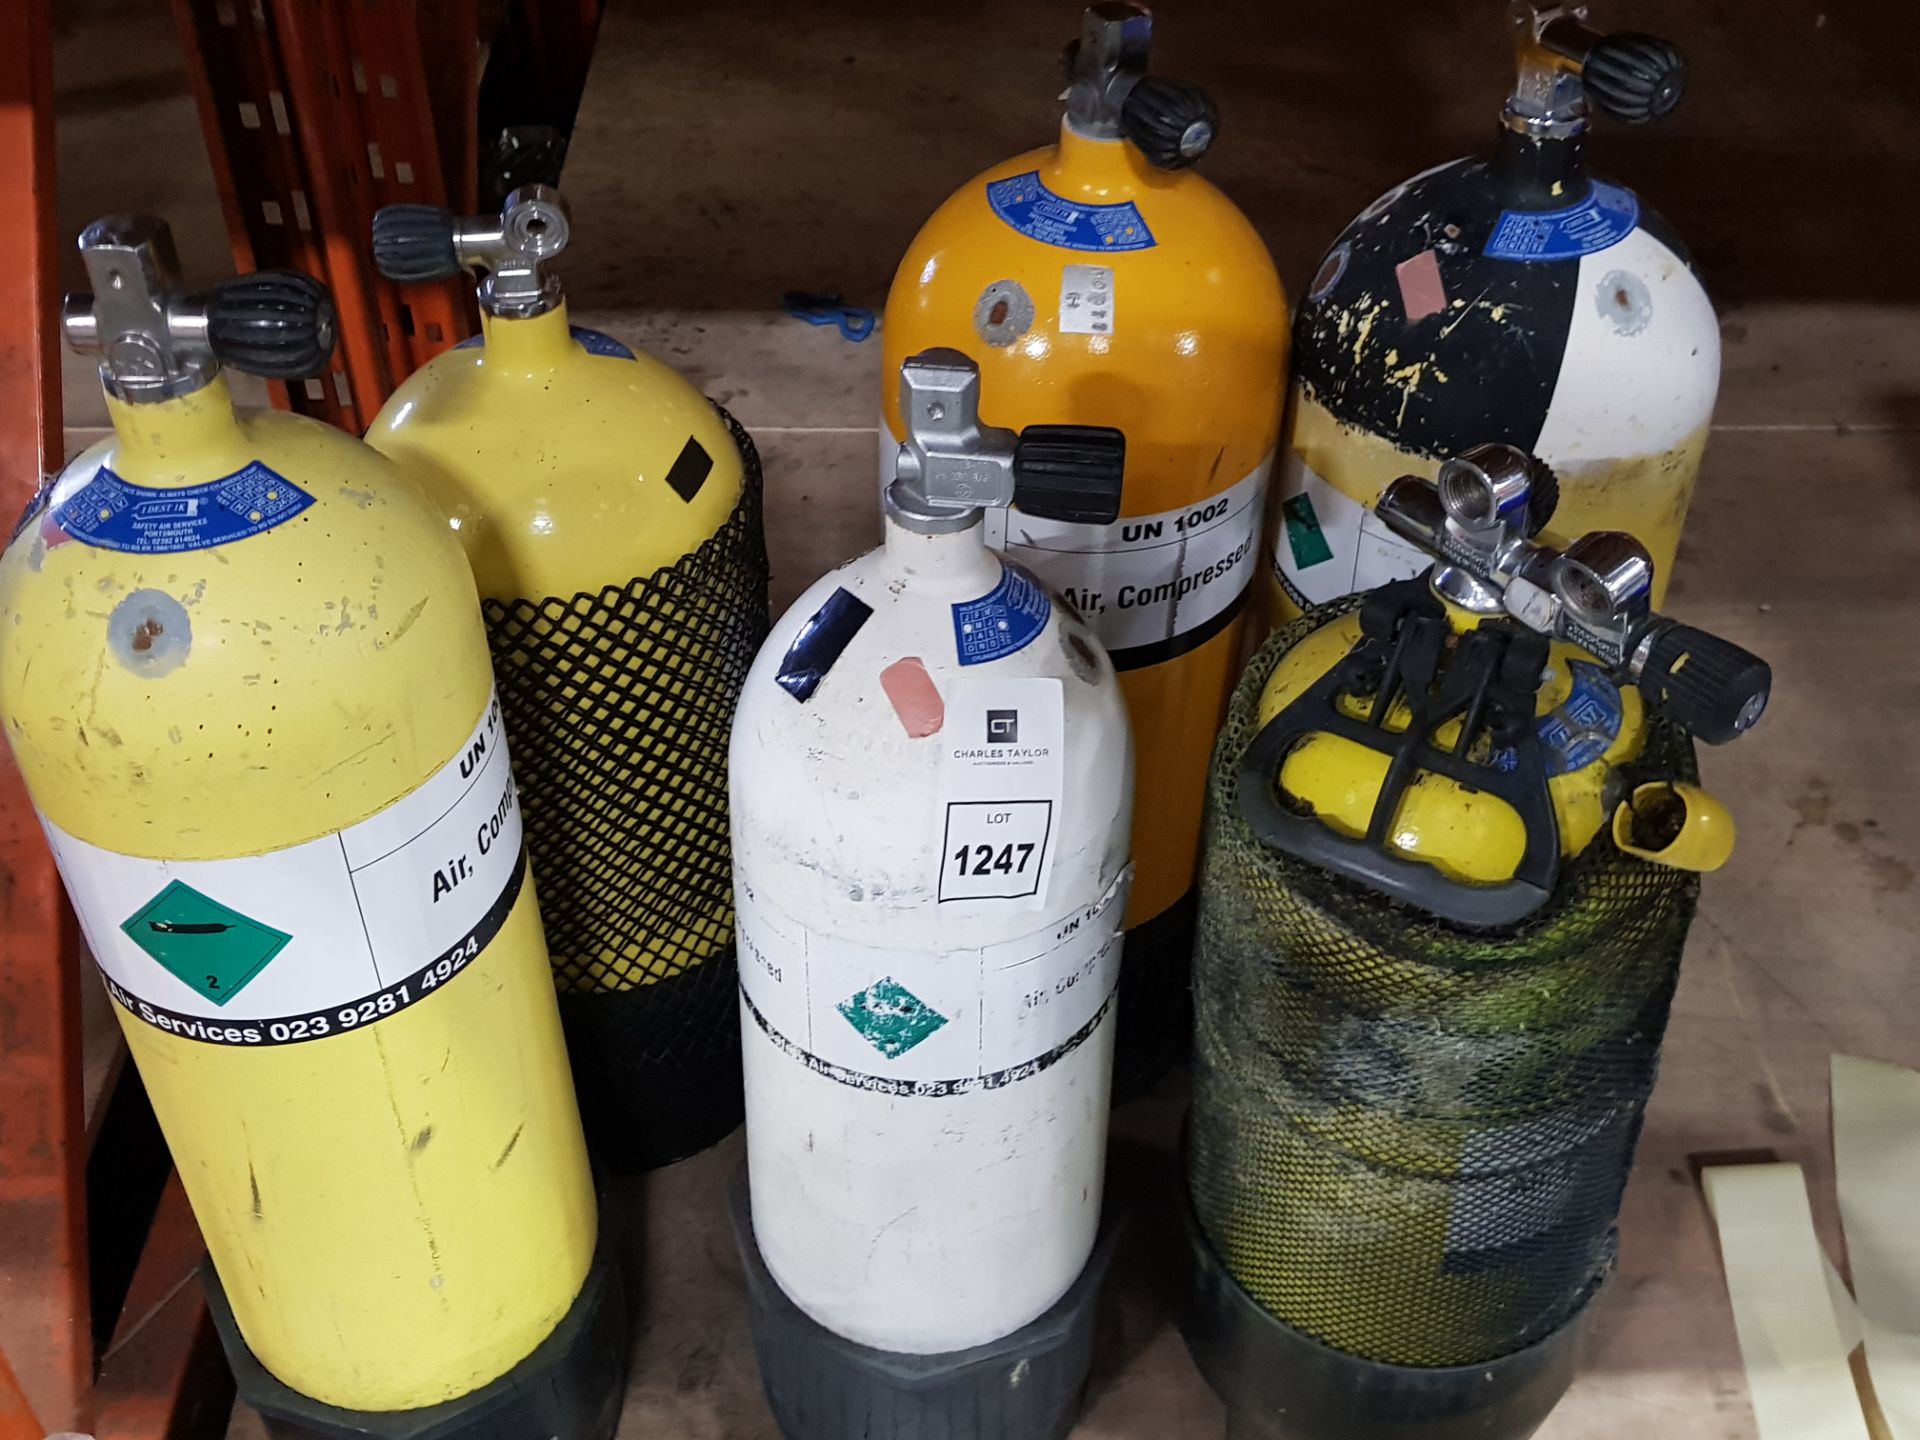 6 X AIR COMPRESSOR TANKS IN VARIOUS SIZES